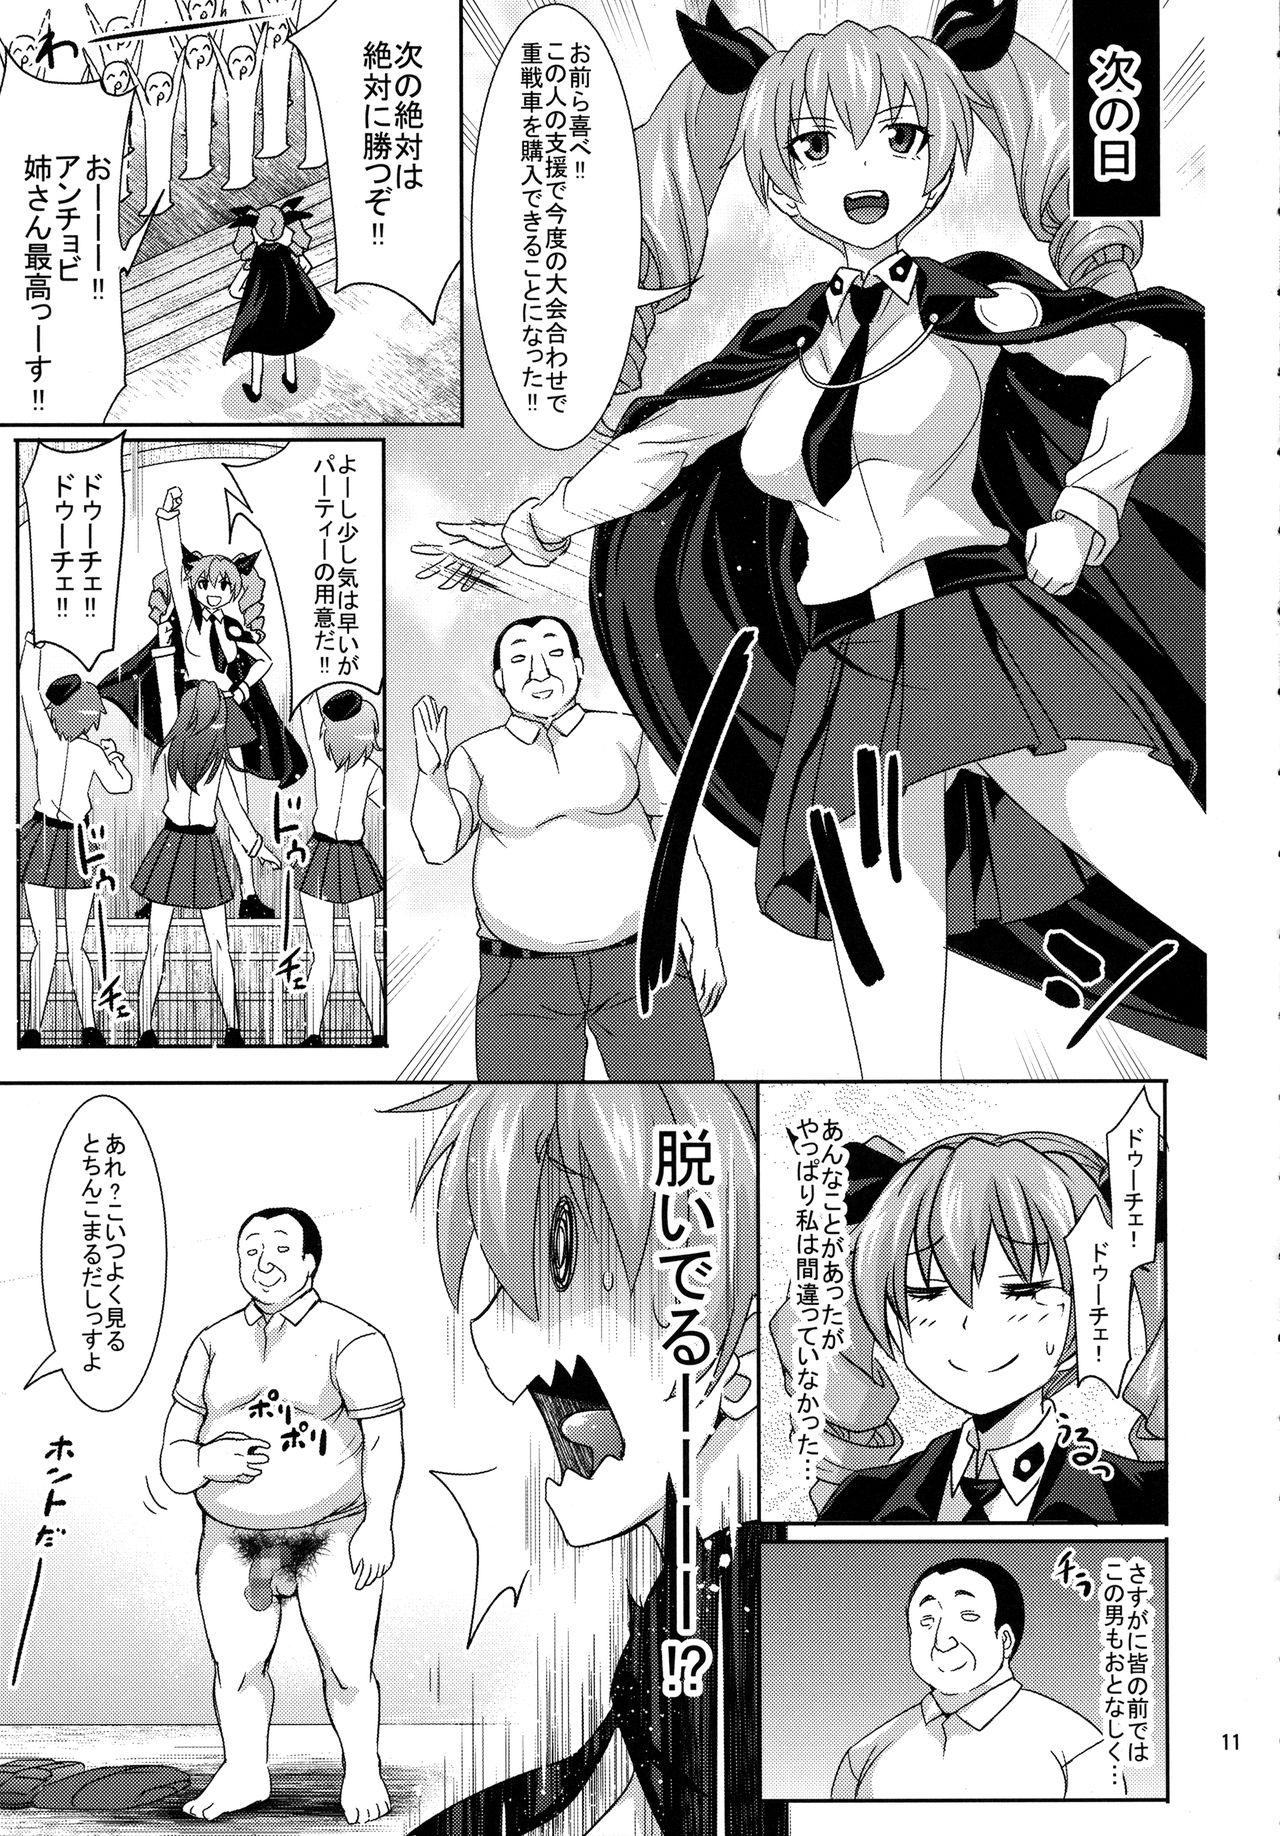 Comedor Anchovy to Duce! Duce! - Girls und panzer Hard Fucking - Page 10